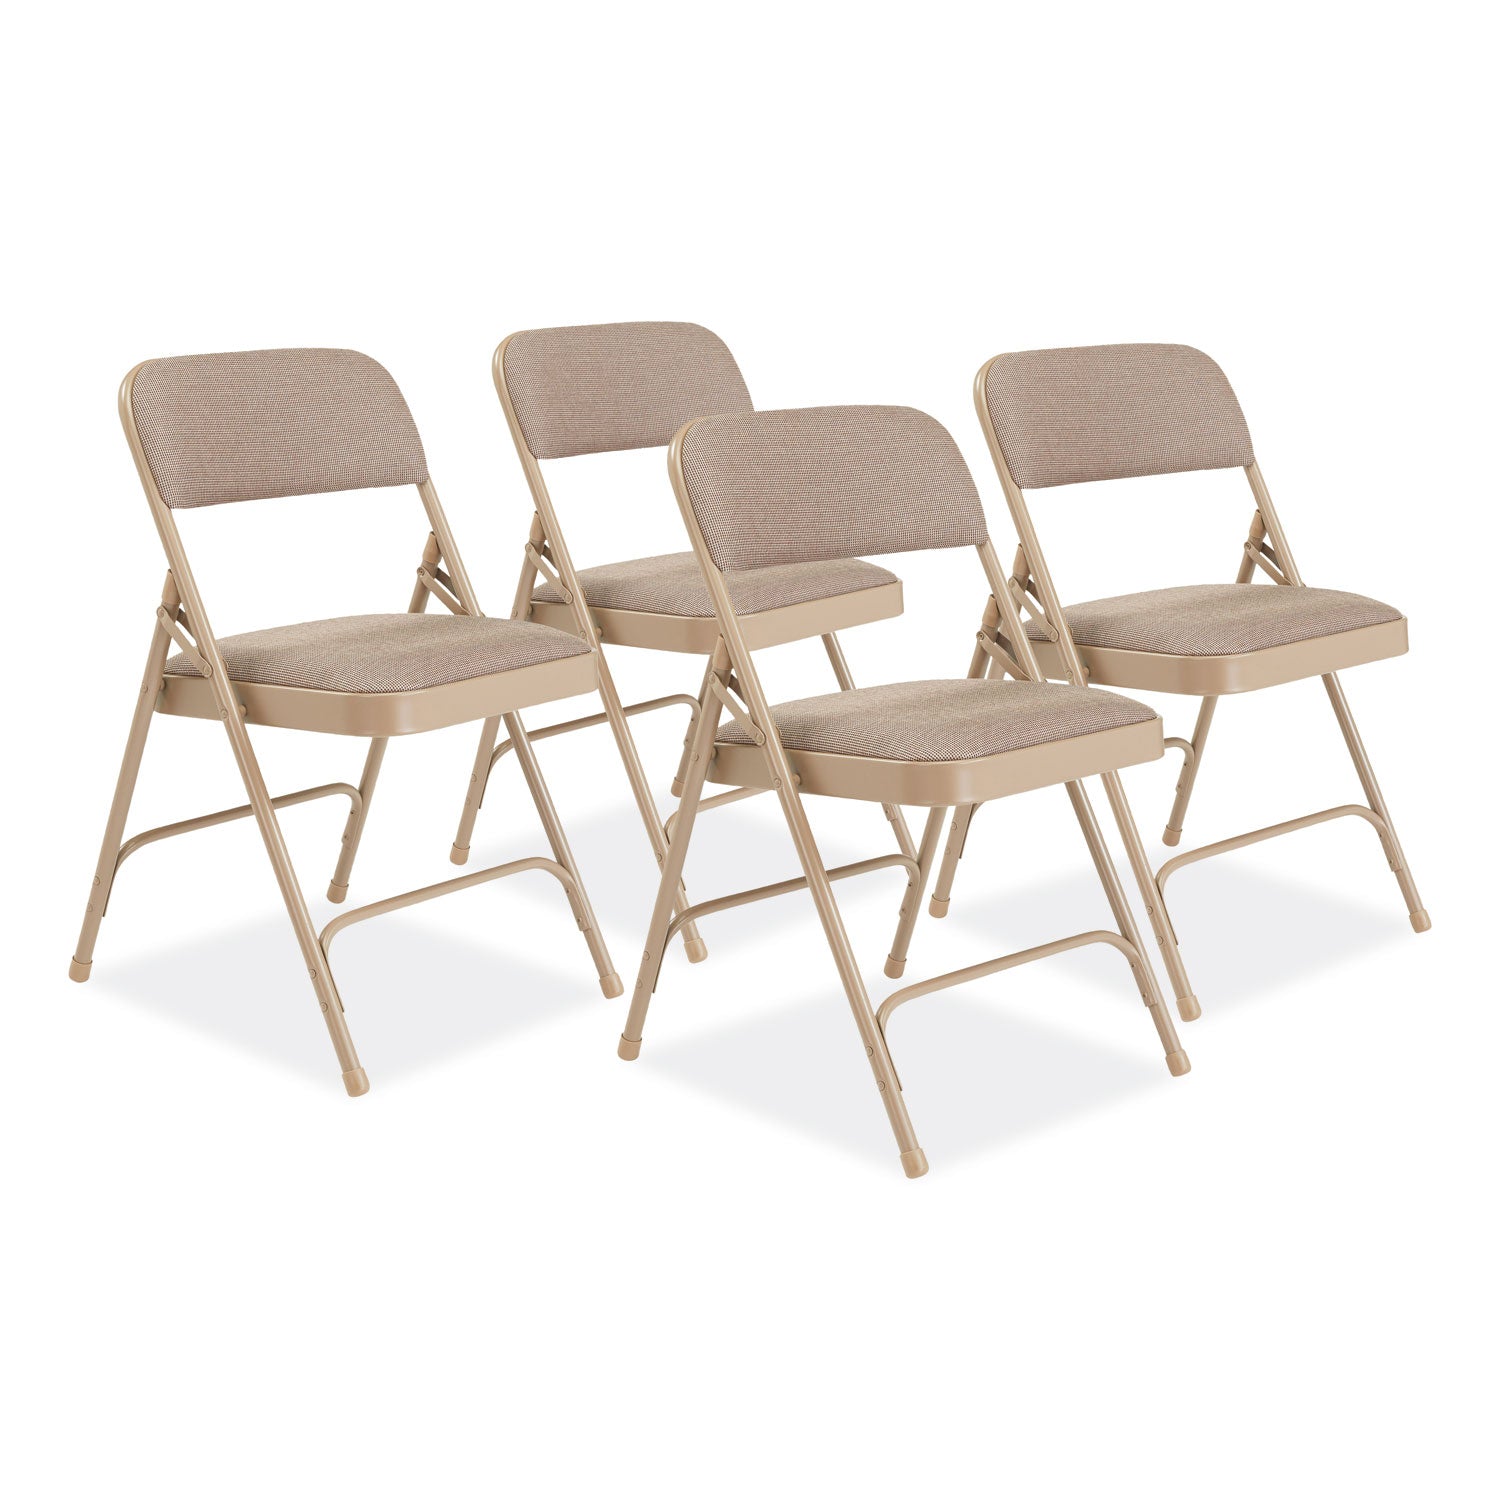 2200-series-deluxe-fabric-upholstered-dual-hinge-premium-folding-chair-supports-500lb-cafe-beige4-ctships-in-1-3-bus-days_nps2201 - 1